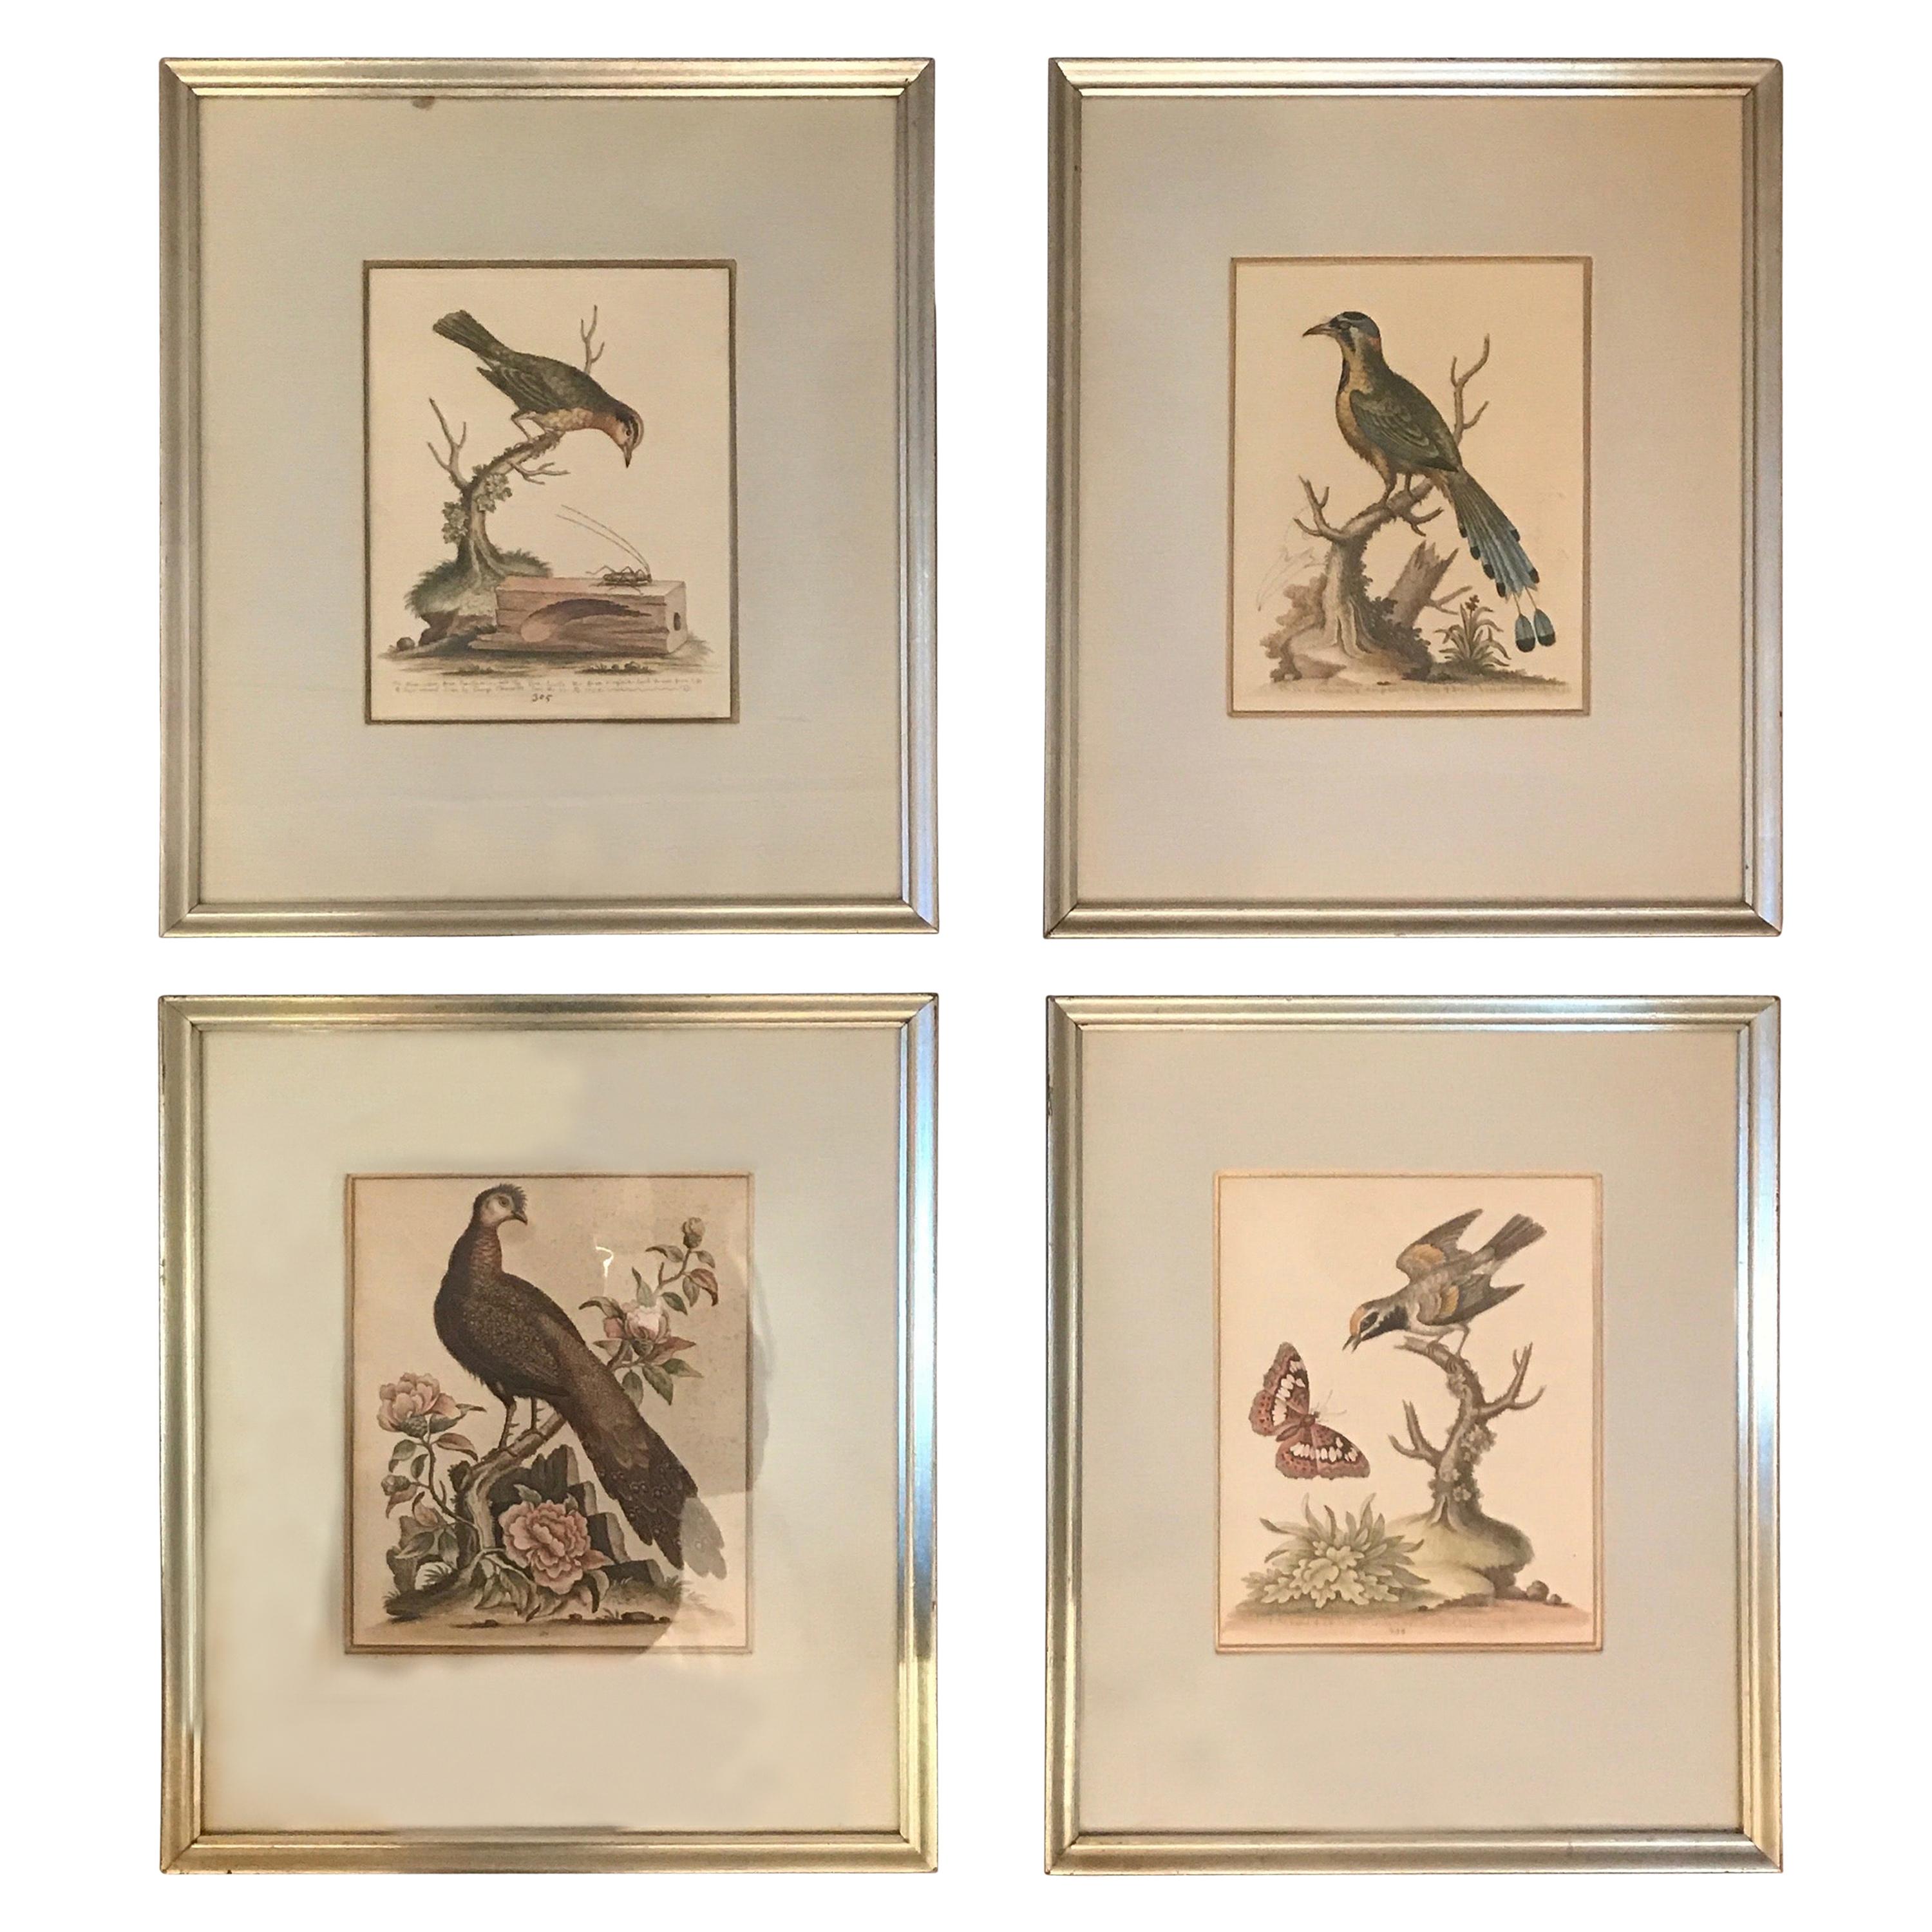 2 Pairs of 18th Century George Edwards Engravings